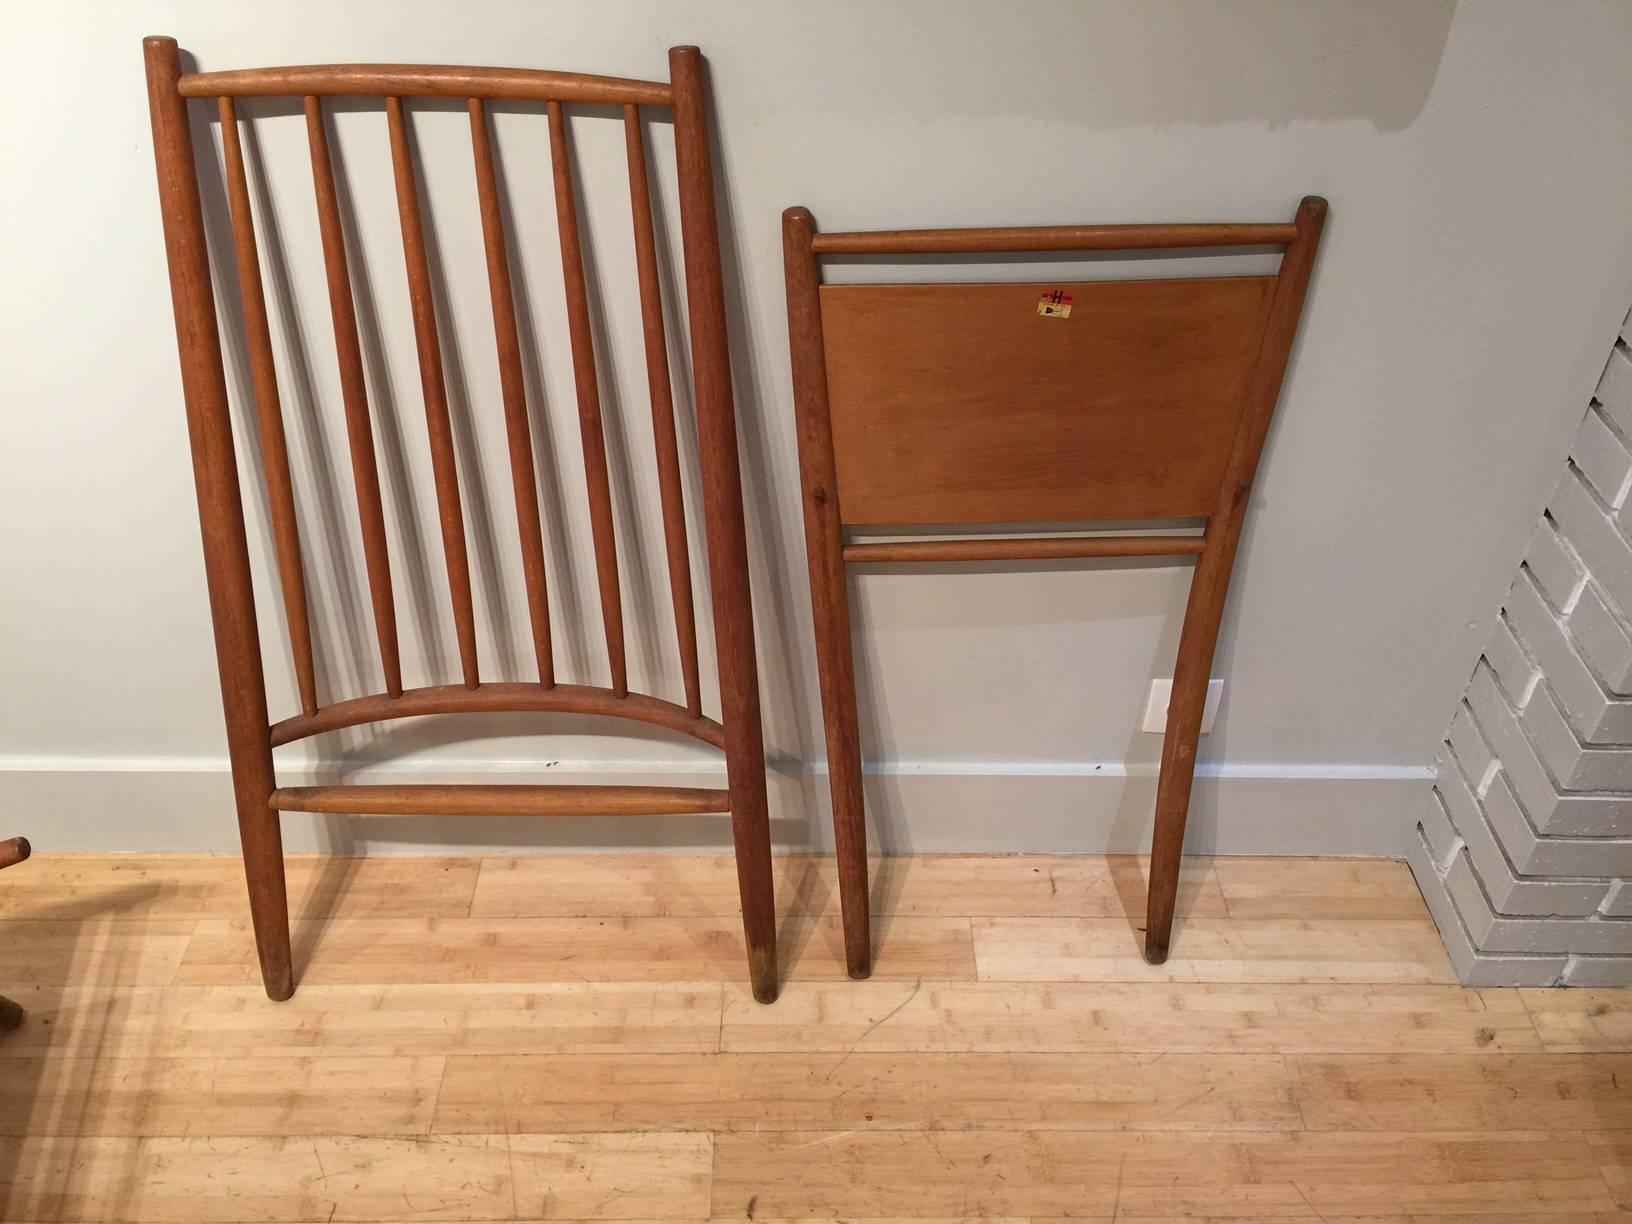 Swedish Pair of Congo Chairs by Alf Svensson, Haga Fors, Sweden, 1954